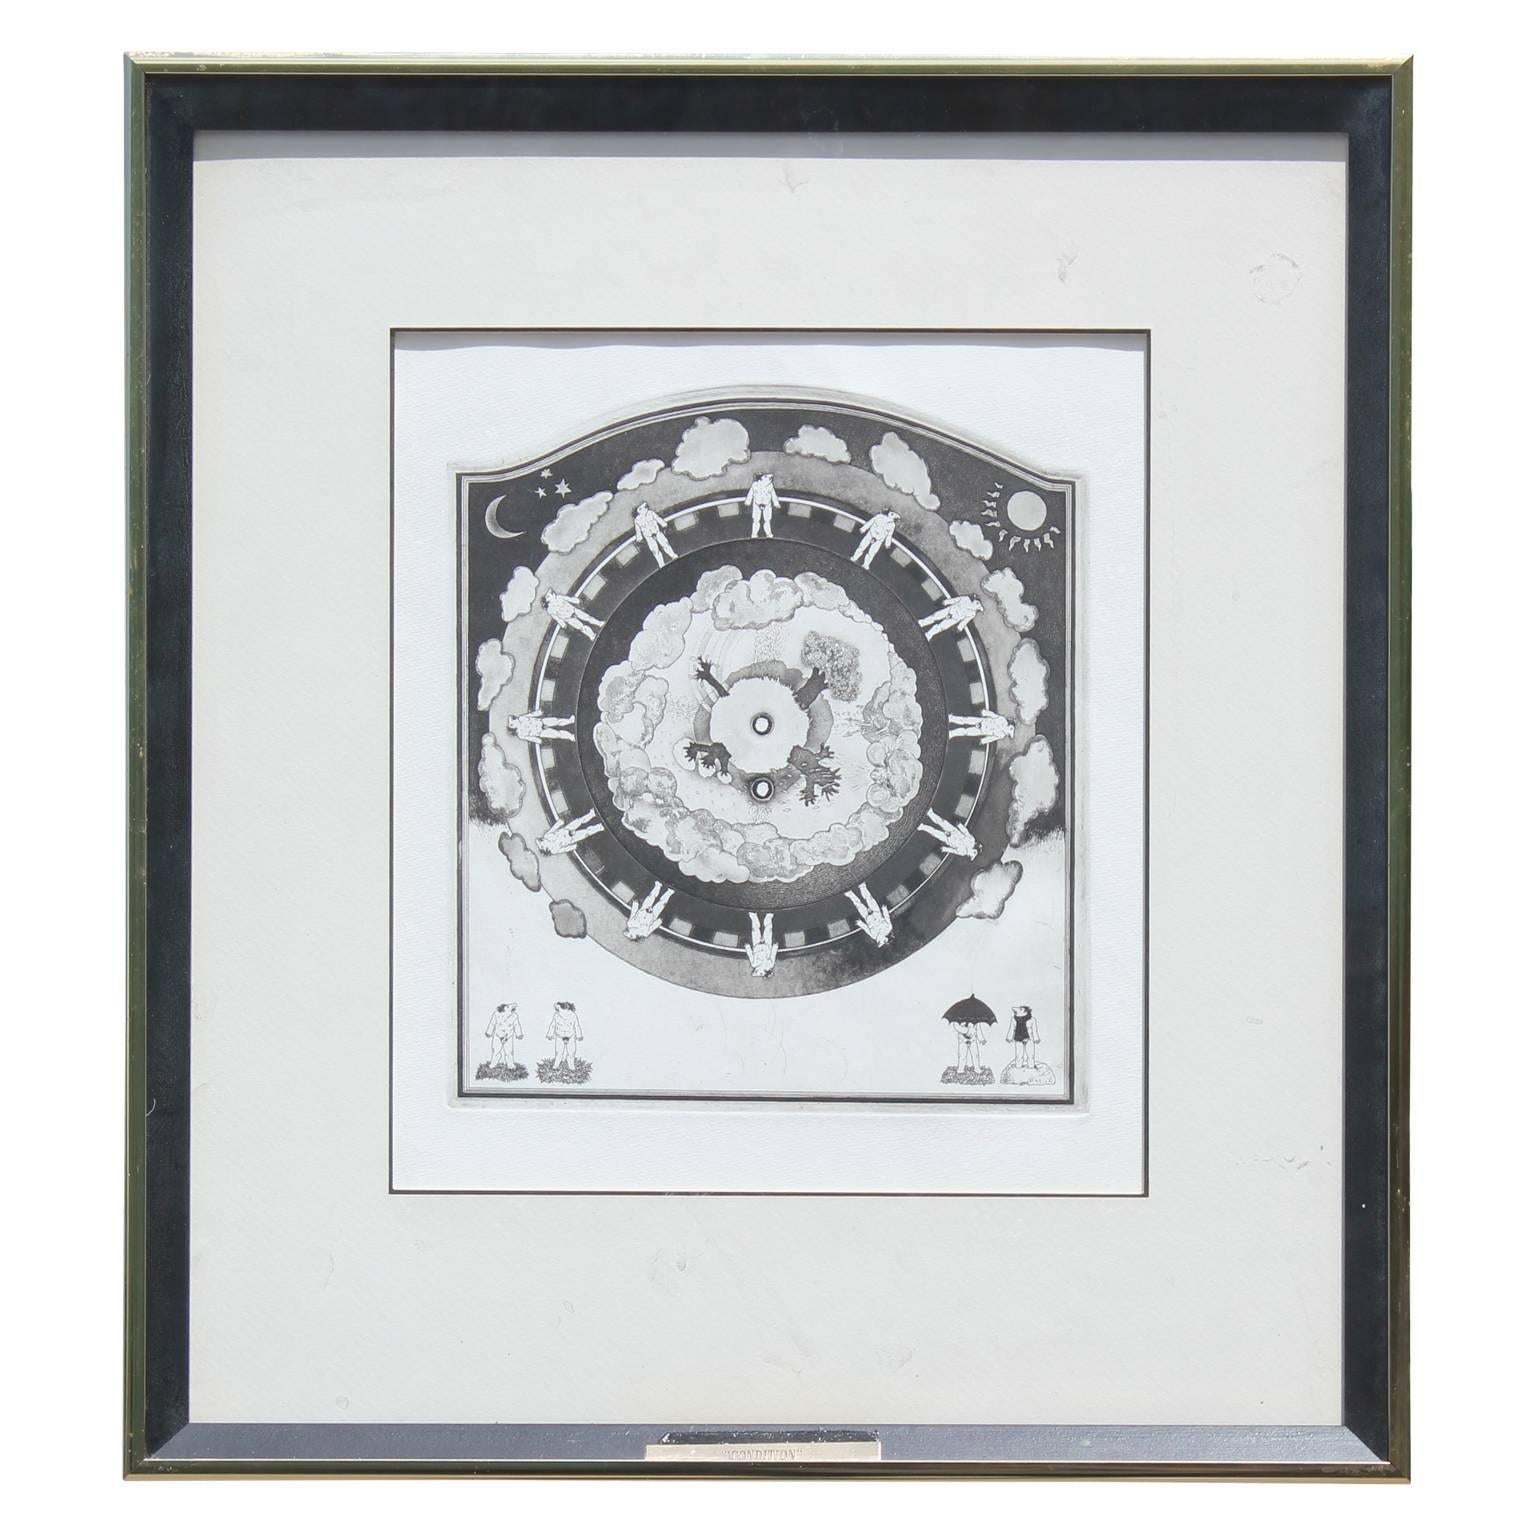 Unknown Abstract Print - "Condition" Seasons Wheel Lithograph